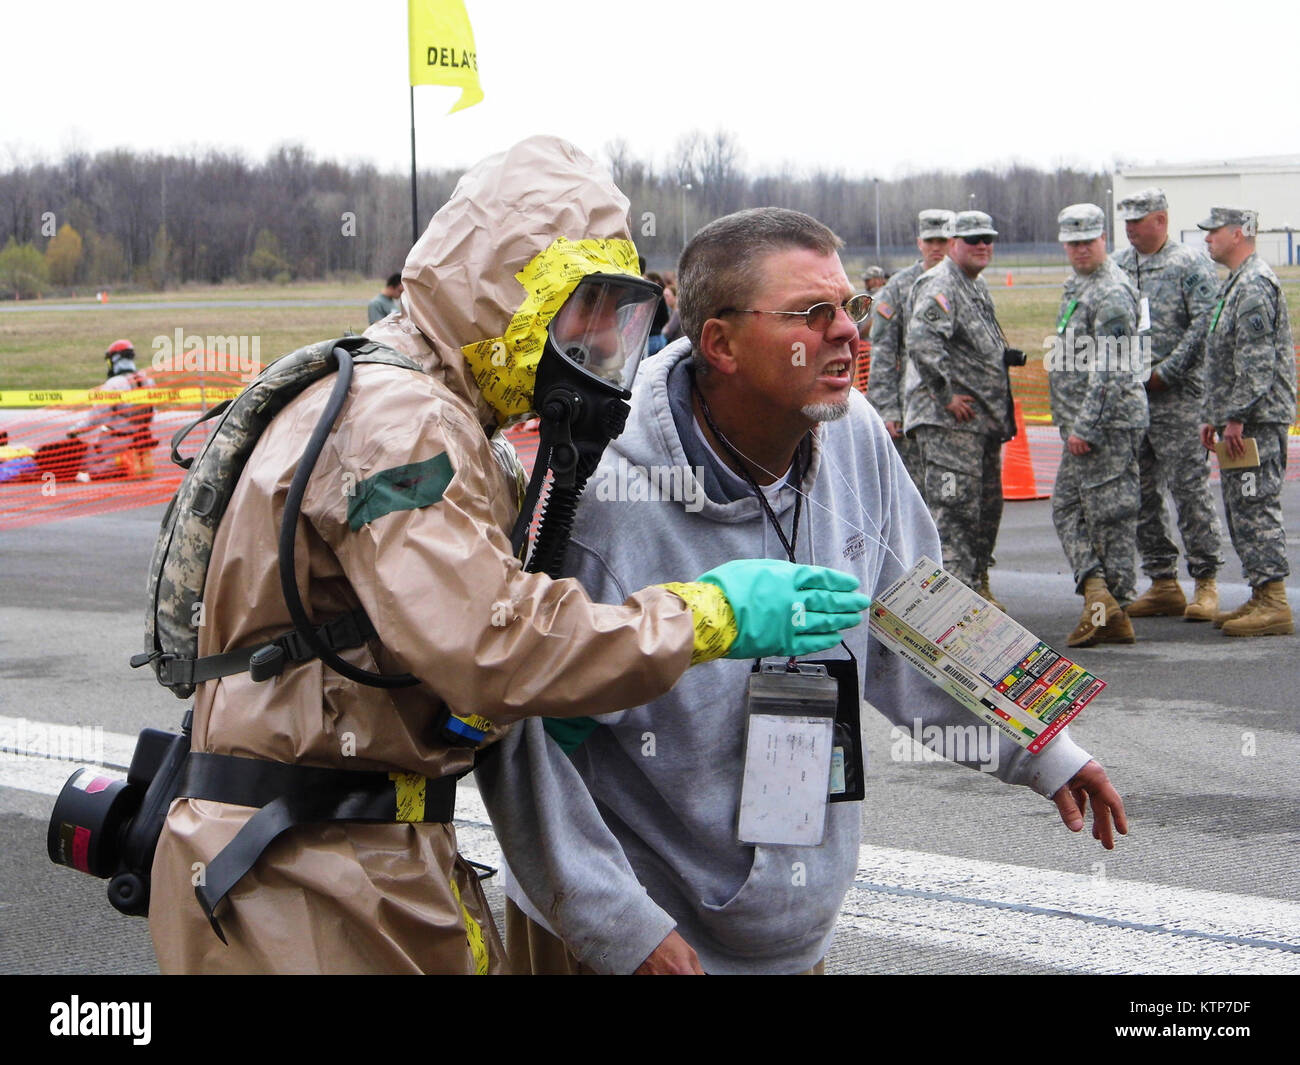 ORISKANY, N.Y. -- A soldier from the decontamination team from the 2nd Squadron, 101 Cavalry, New York Army National Guard guides a victim of a chemical exposure into the ambulatory decontamination tent during a Homeland Response Force exercise at the New York State Preparedness Center here, May 1, 2014 (Photo by 2nd Lt. Roman Pyatetsky). Stock Photo